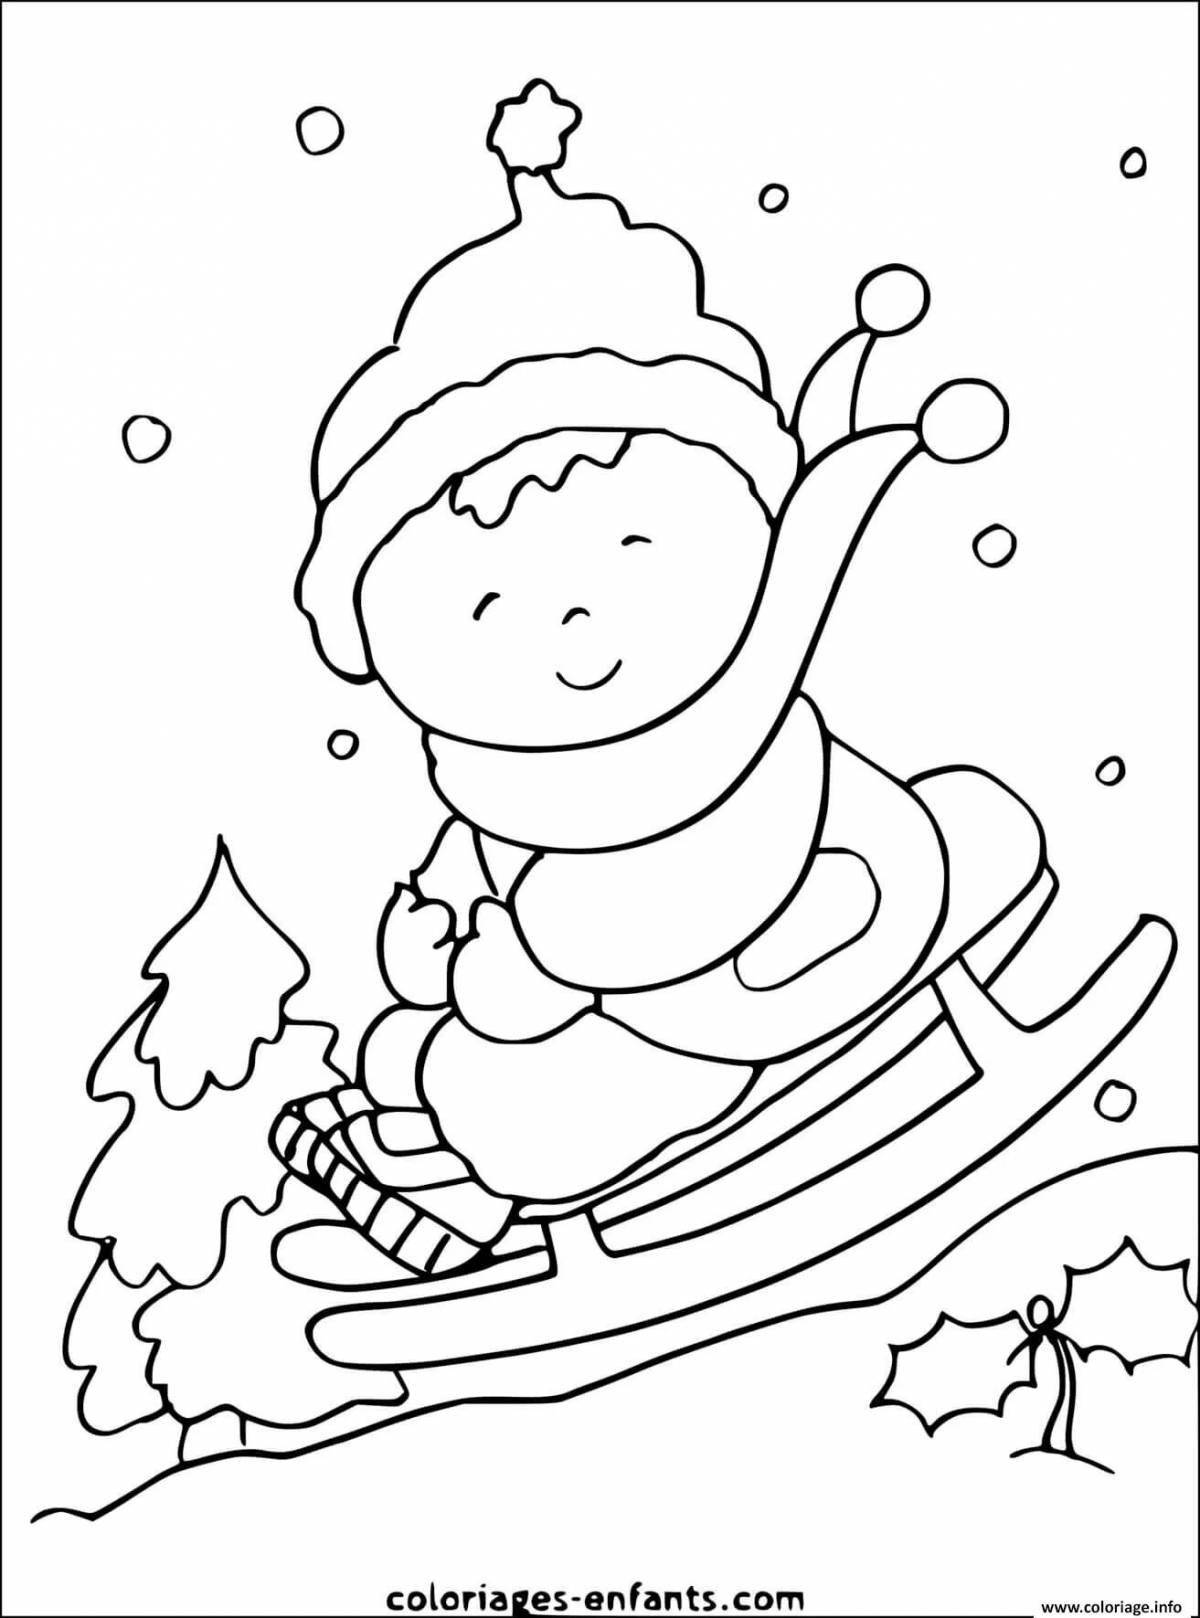 Glamor coloring winter for children 2-3 years old